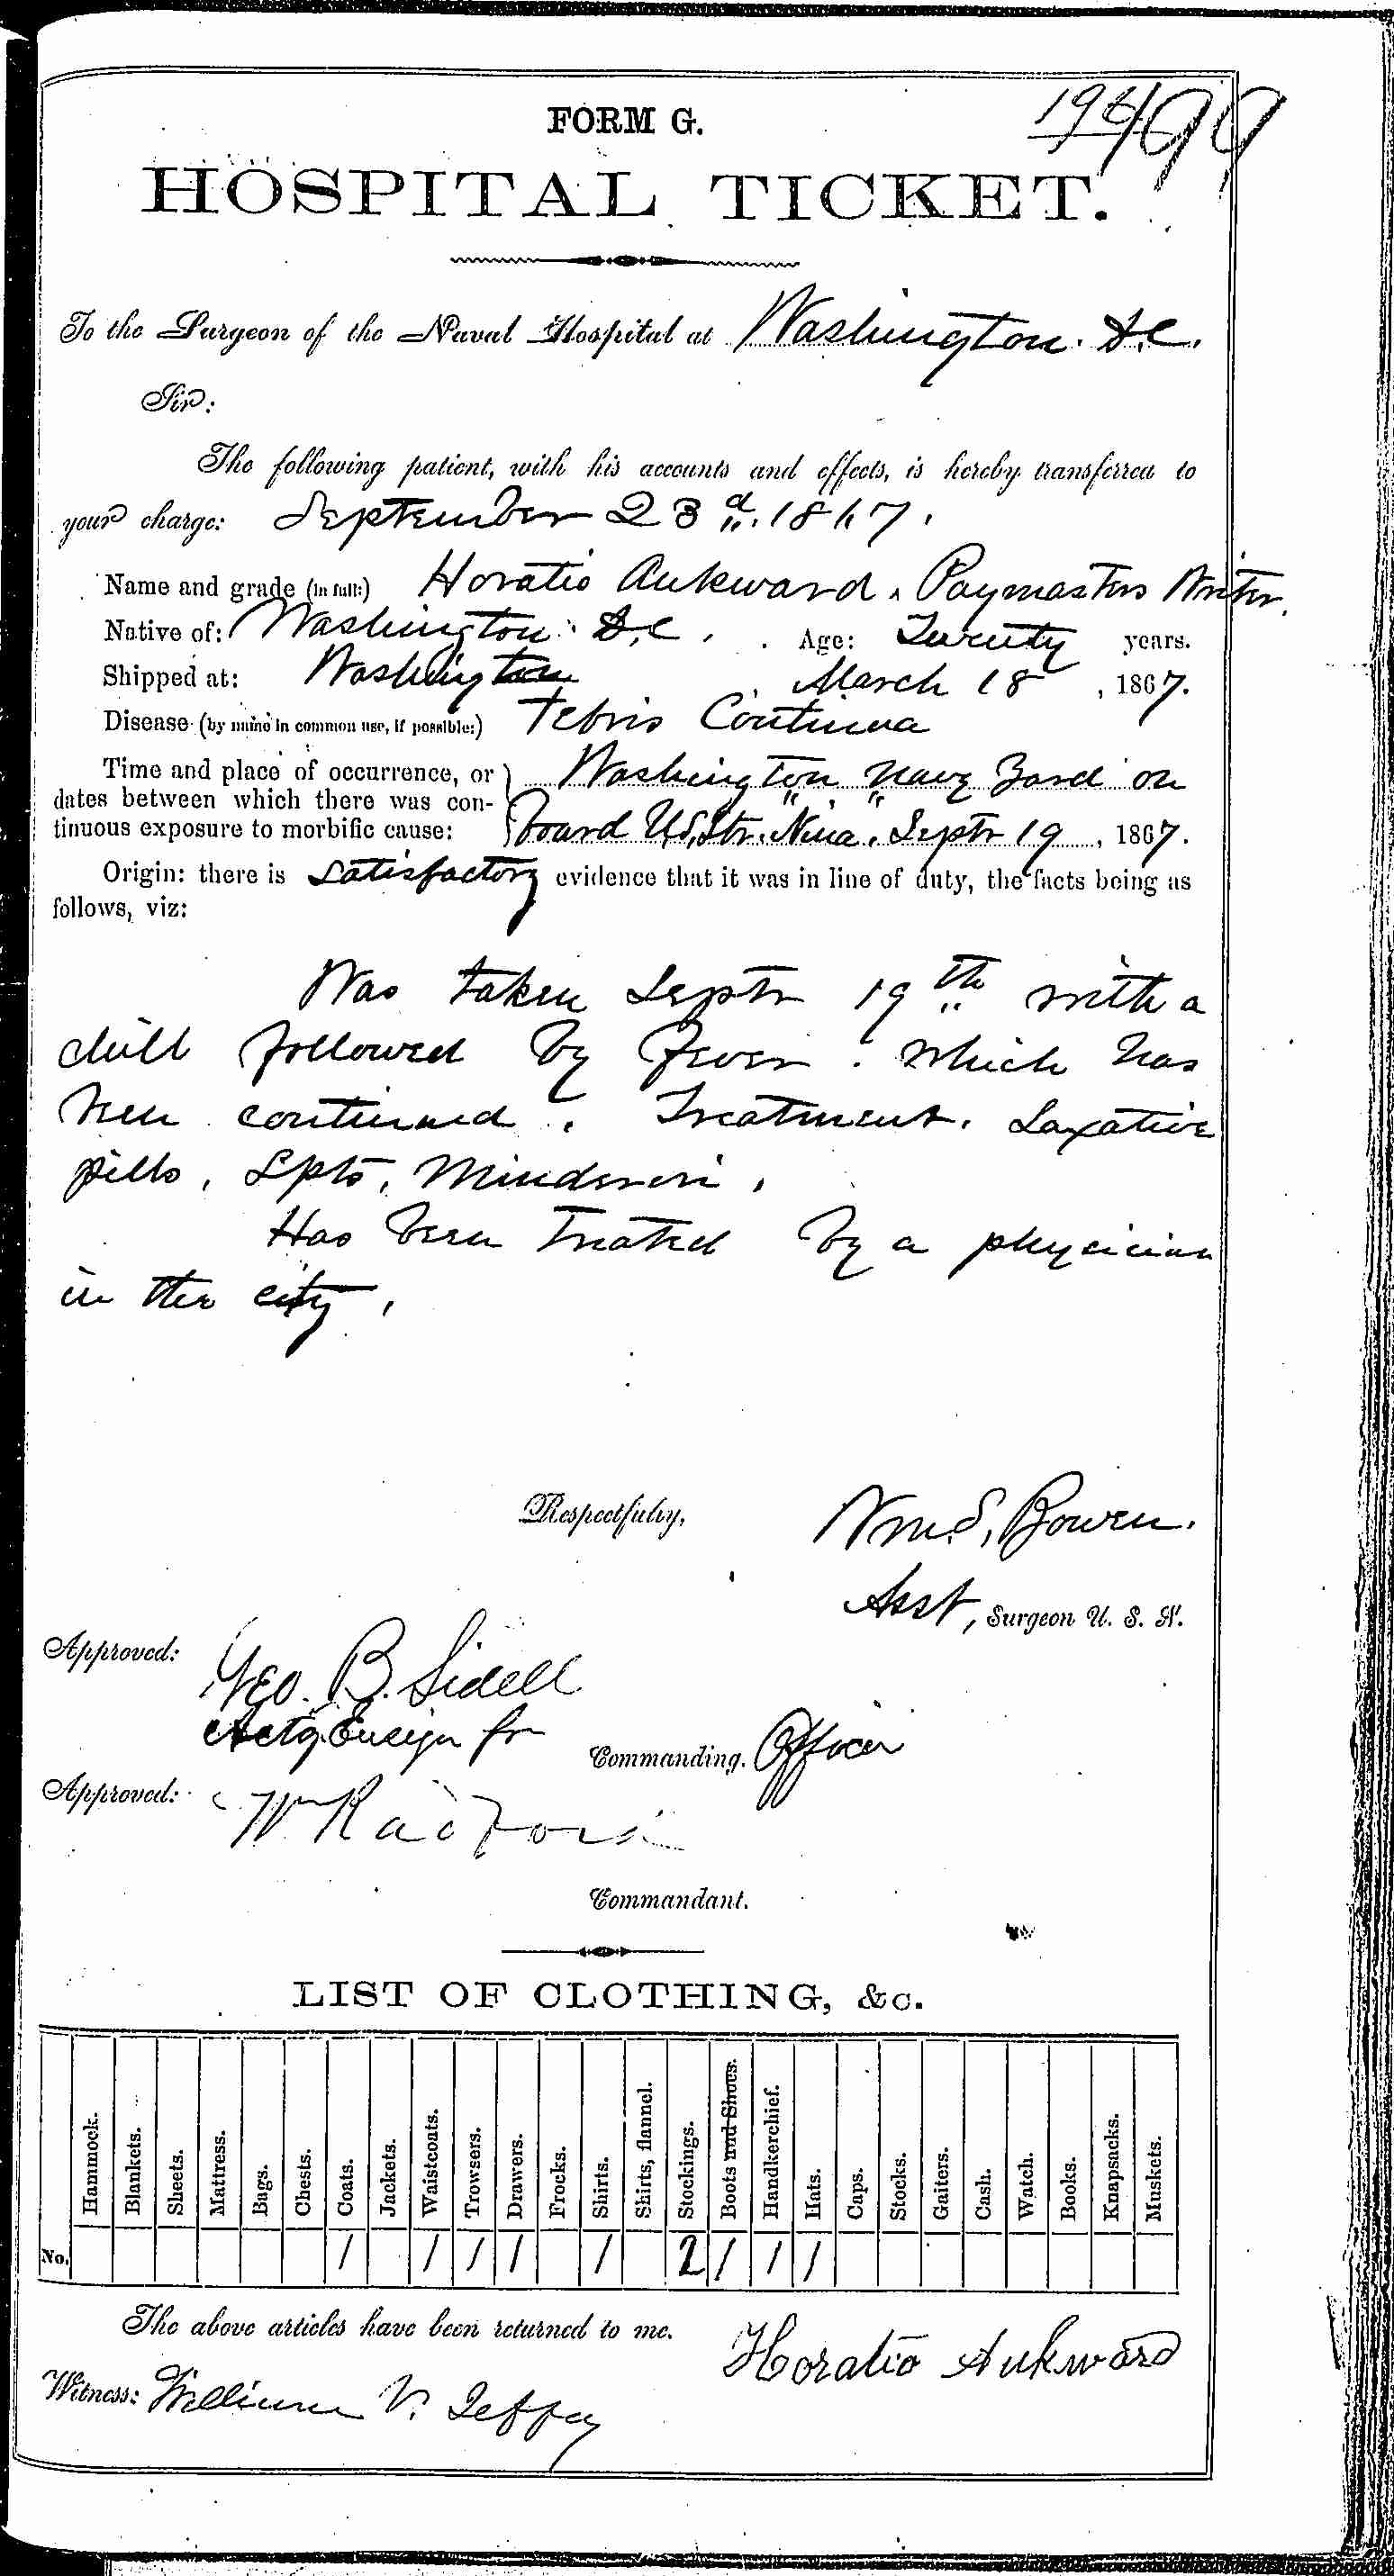 Entry for Horatio Aukward (page 1 of 2) in the log Hospital Tickets and Case Papers - Naval Hospital - Washington, D.C. - 1866-68